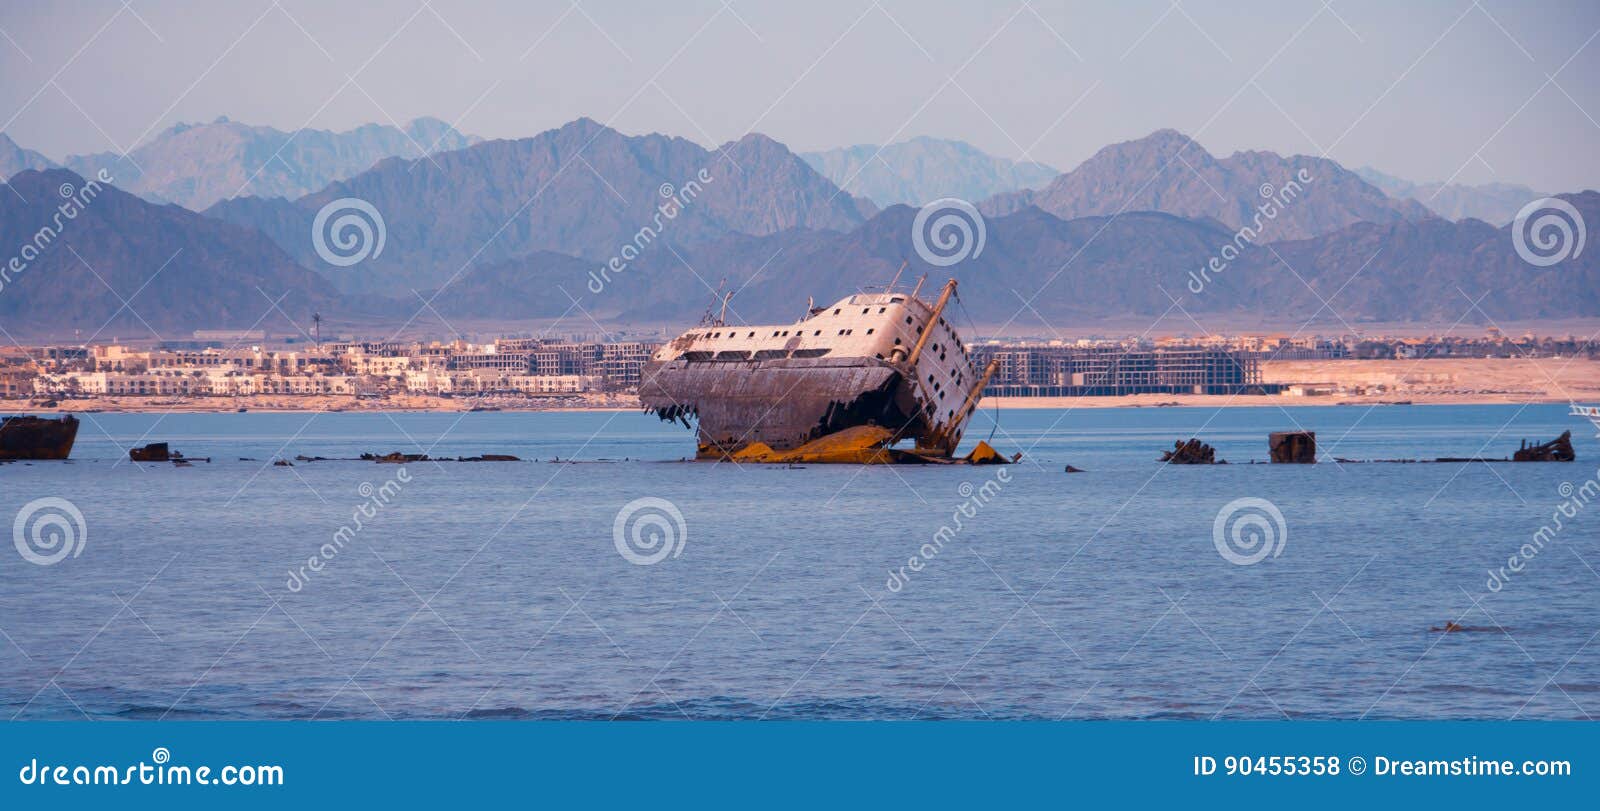 abandoned ship in the sea